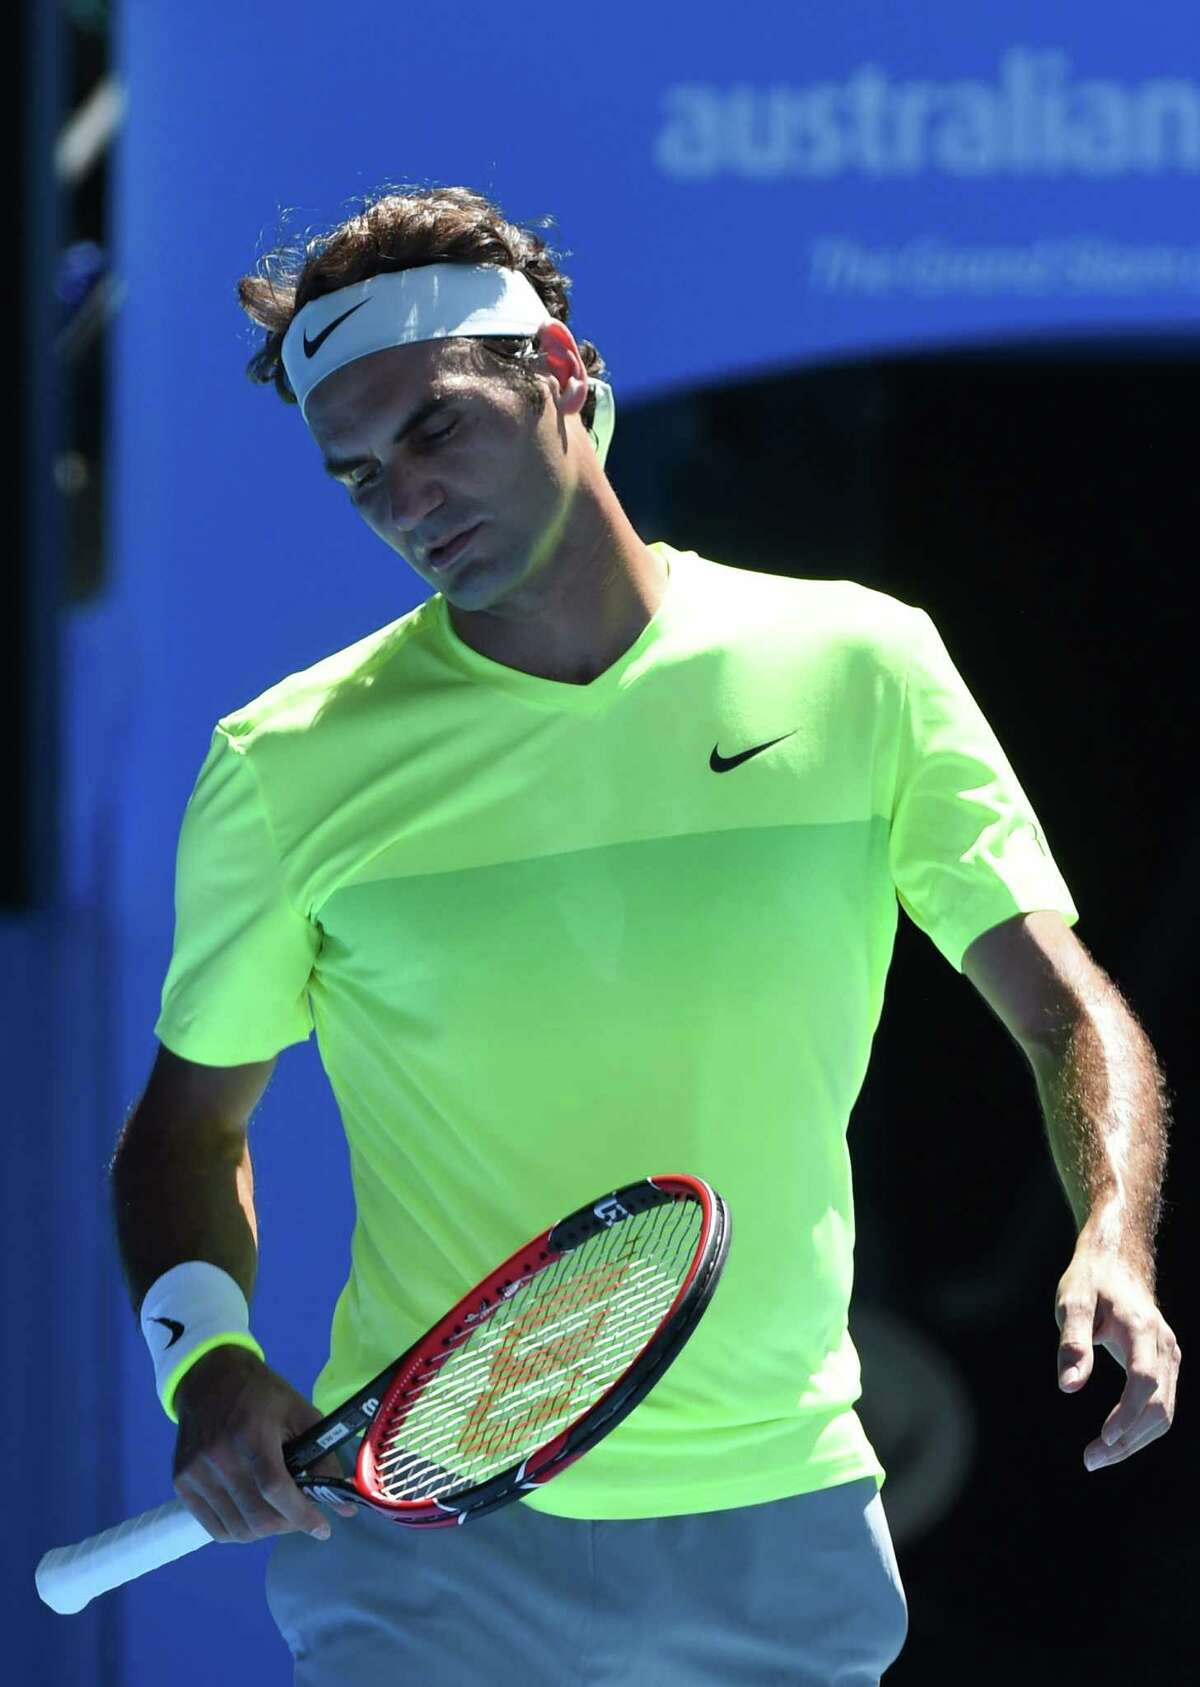 Switzerland's Roger Federer reacts during his men's singles match against Italy's Andreas Seppi on day five of the 2015 Australian Open tennis tournament in Melbourne on January 23, 2015. AFP PHOTO / MAL FAIRCLOUGH-- IMAGE RESTRICTED TO EDITORIAL USE - STRICTLY NO COMMERCIAL USEMAL FAIRCLOUGH/AFP/Getty Images